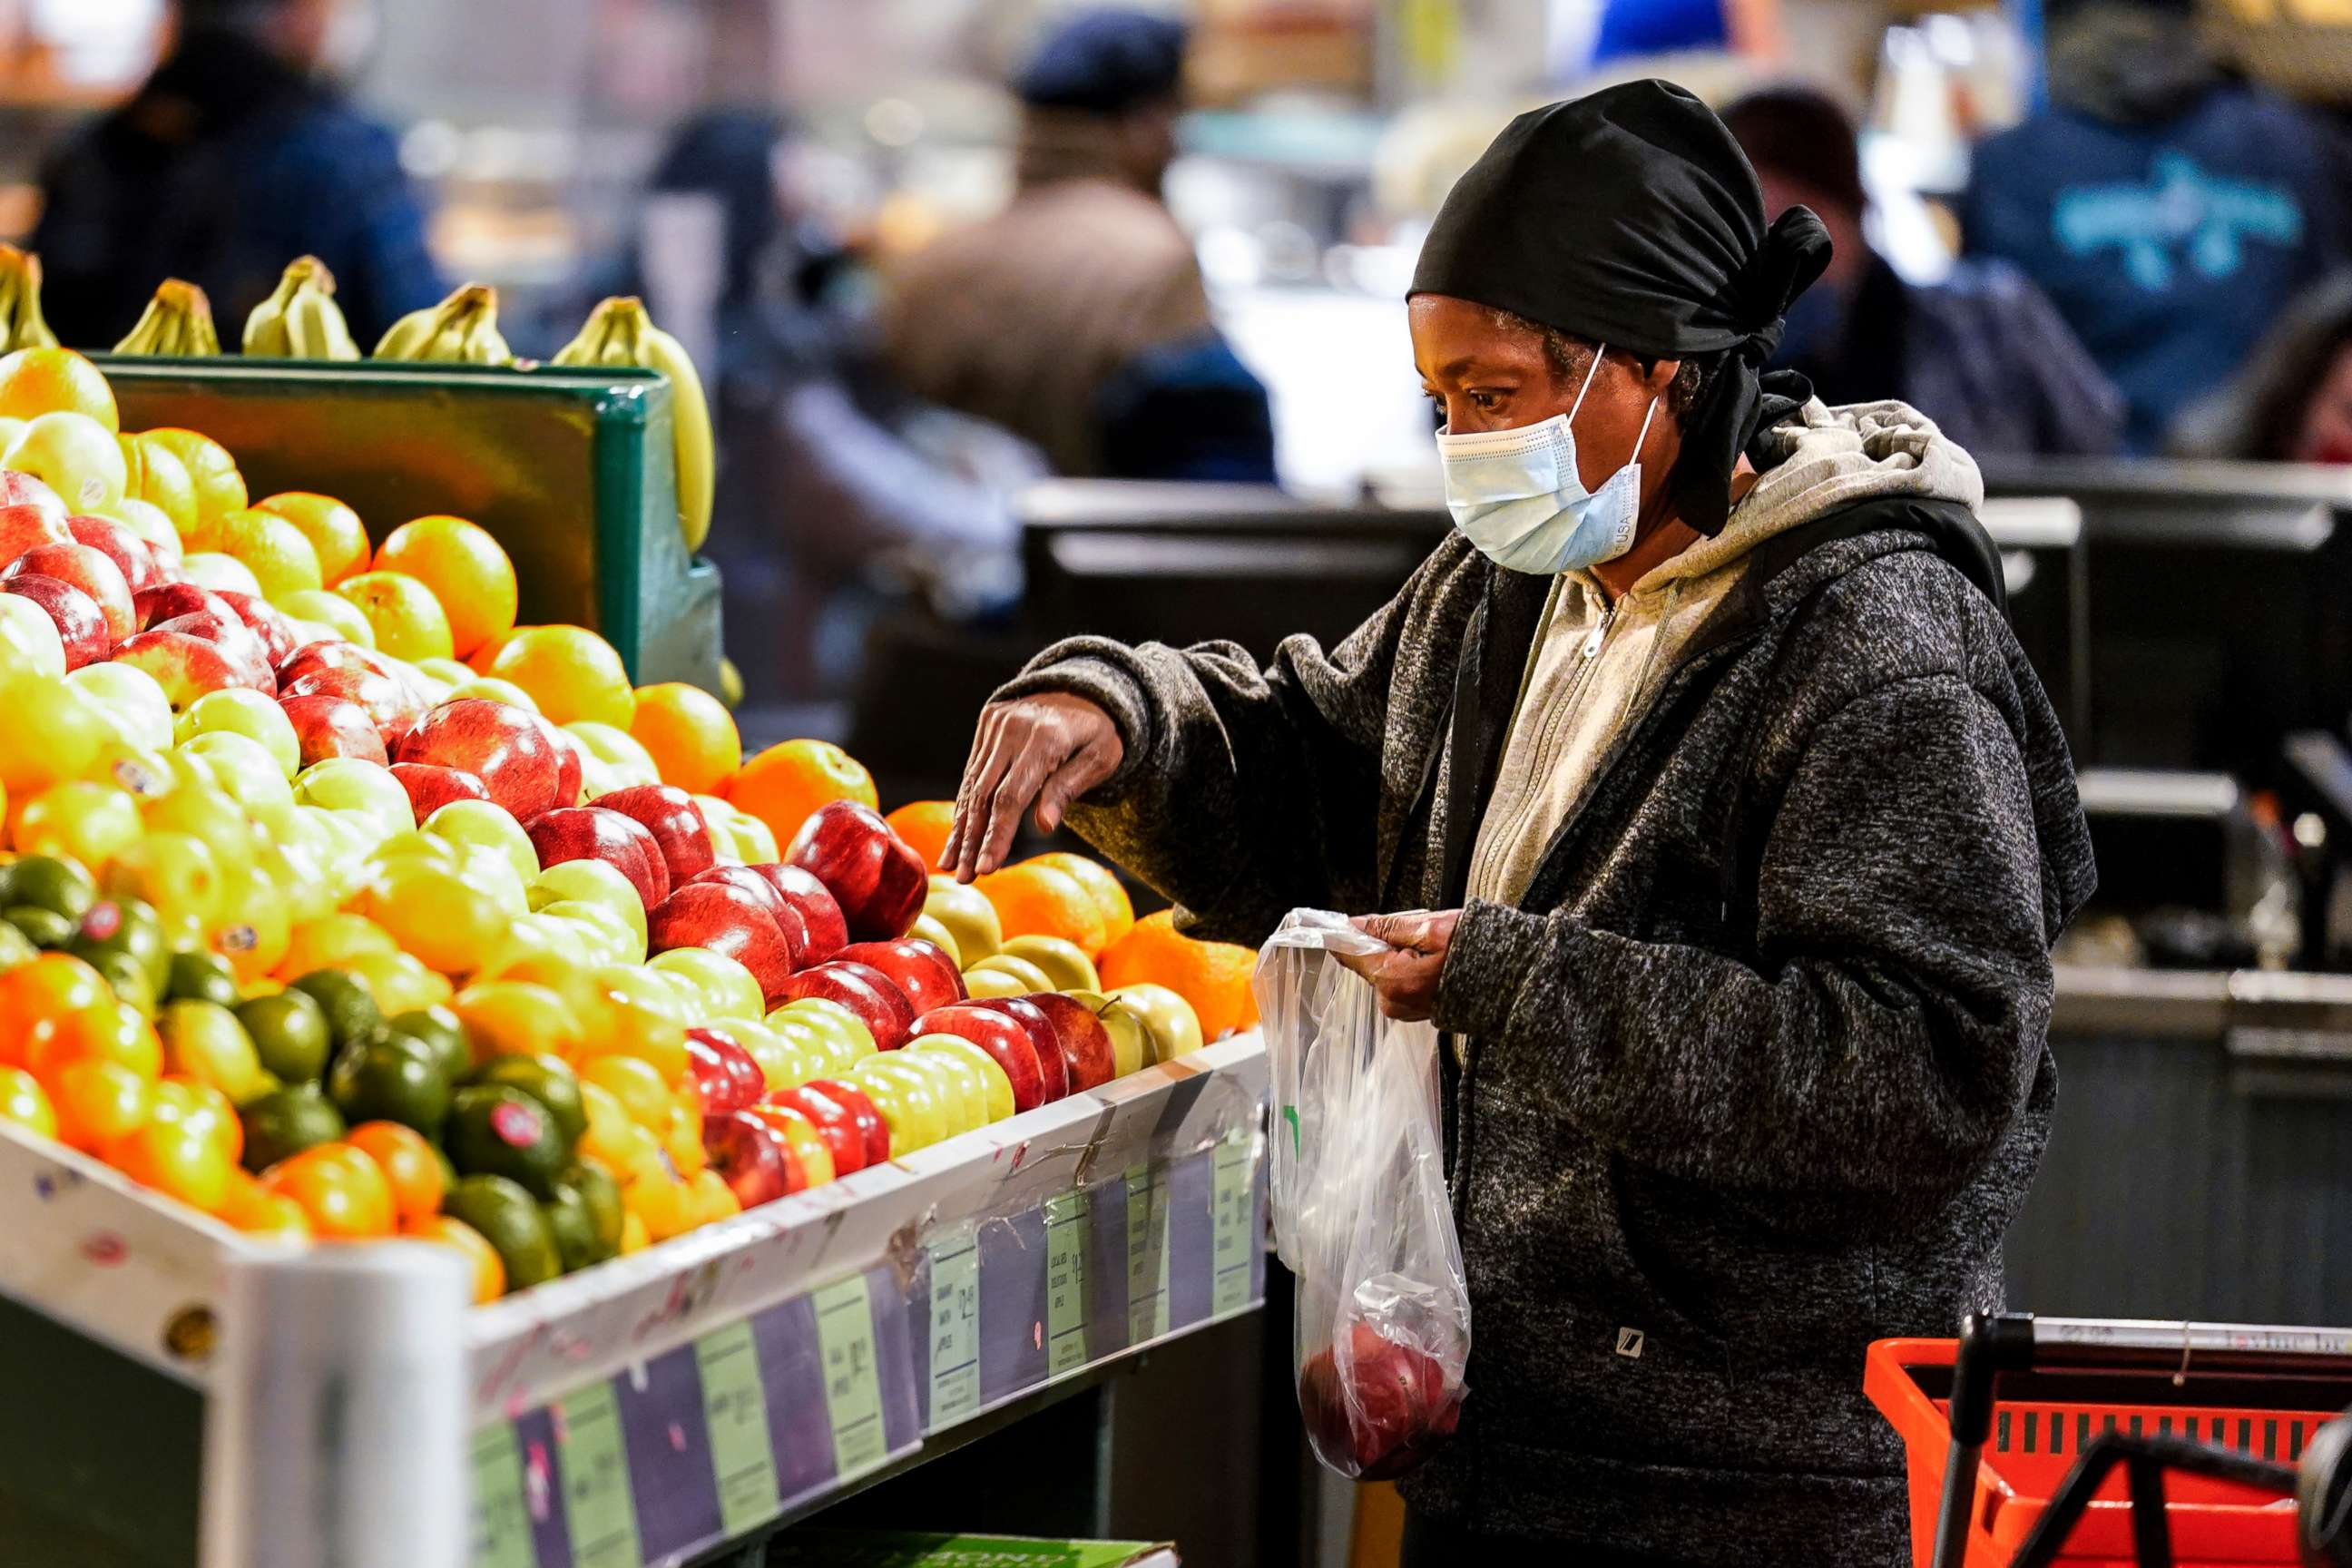 PHOTO: A shopper waring a protective mask as a precaution against the spread of the coronavirus selects fruit at the Reading Terminal Market in Philadelphia, Feb. 16, 2022.